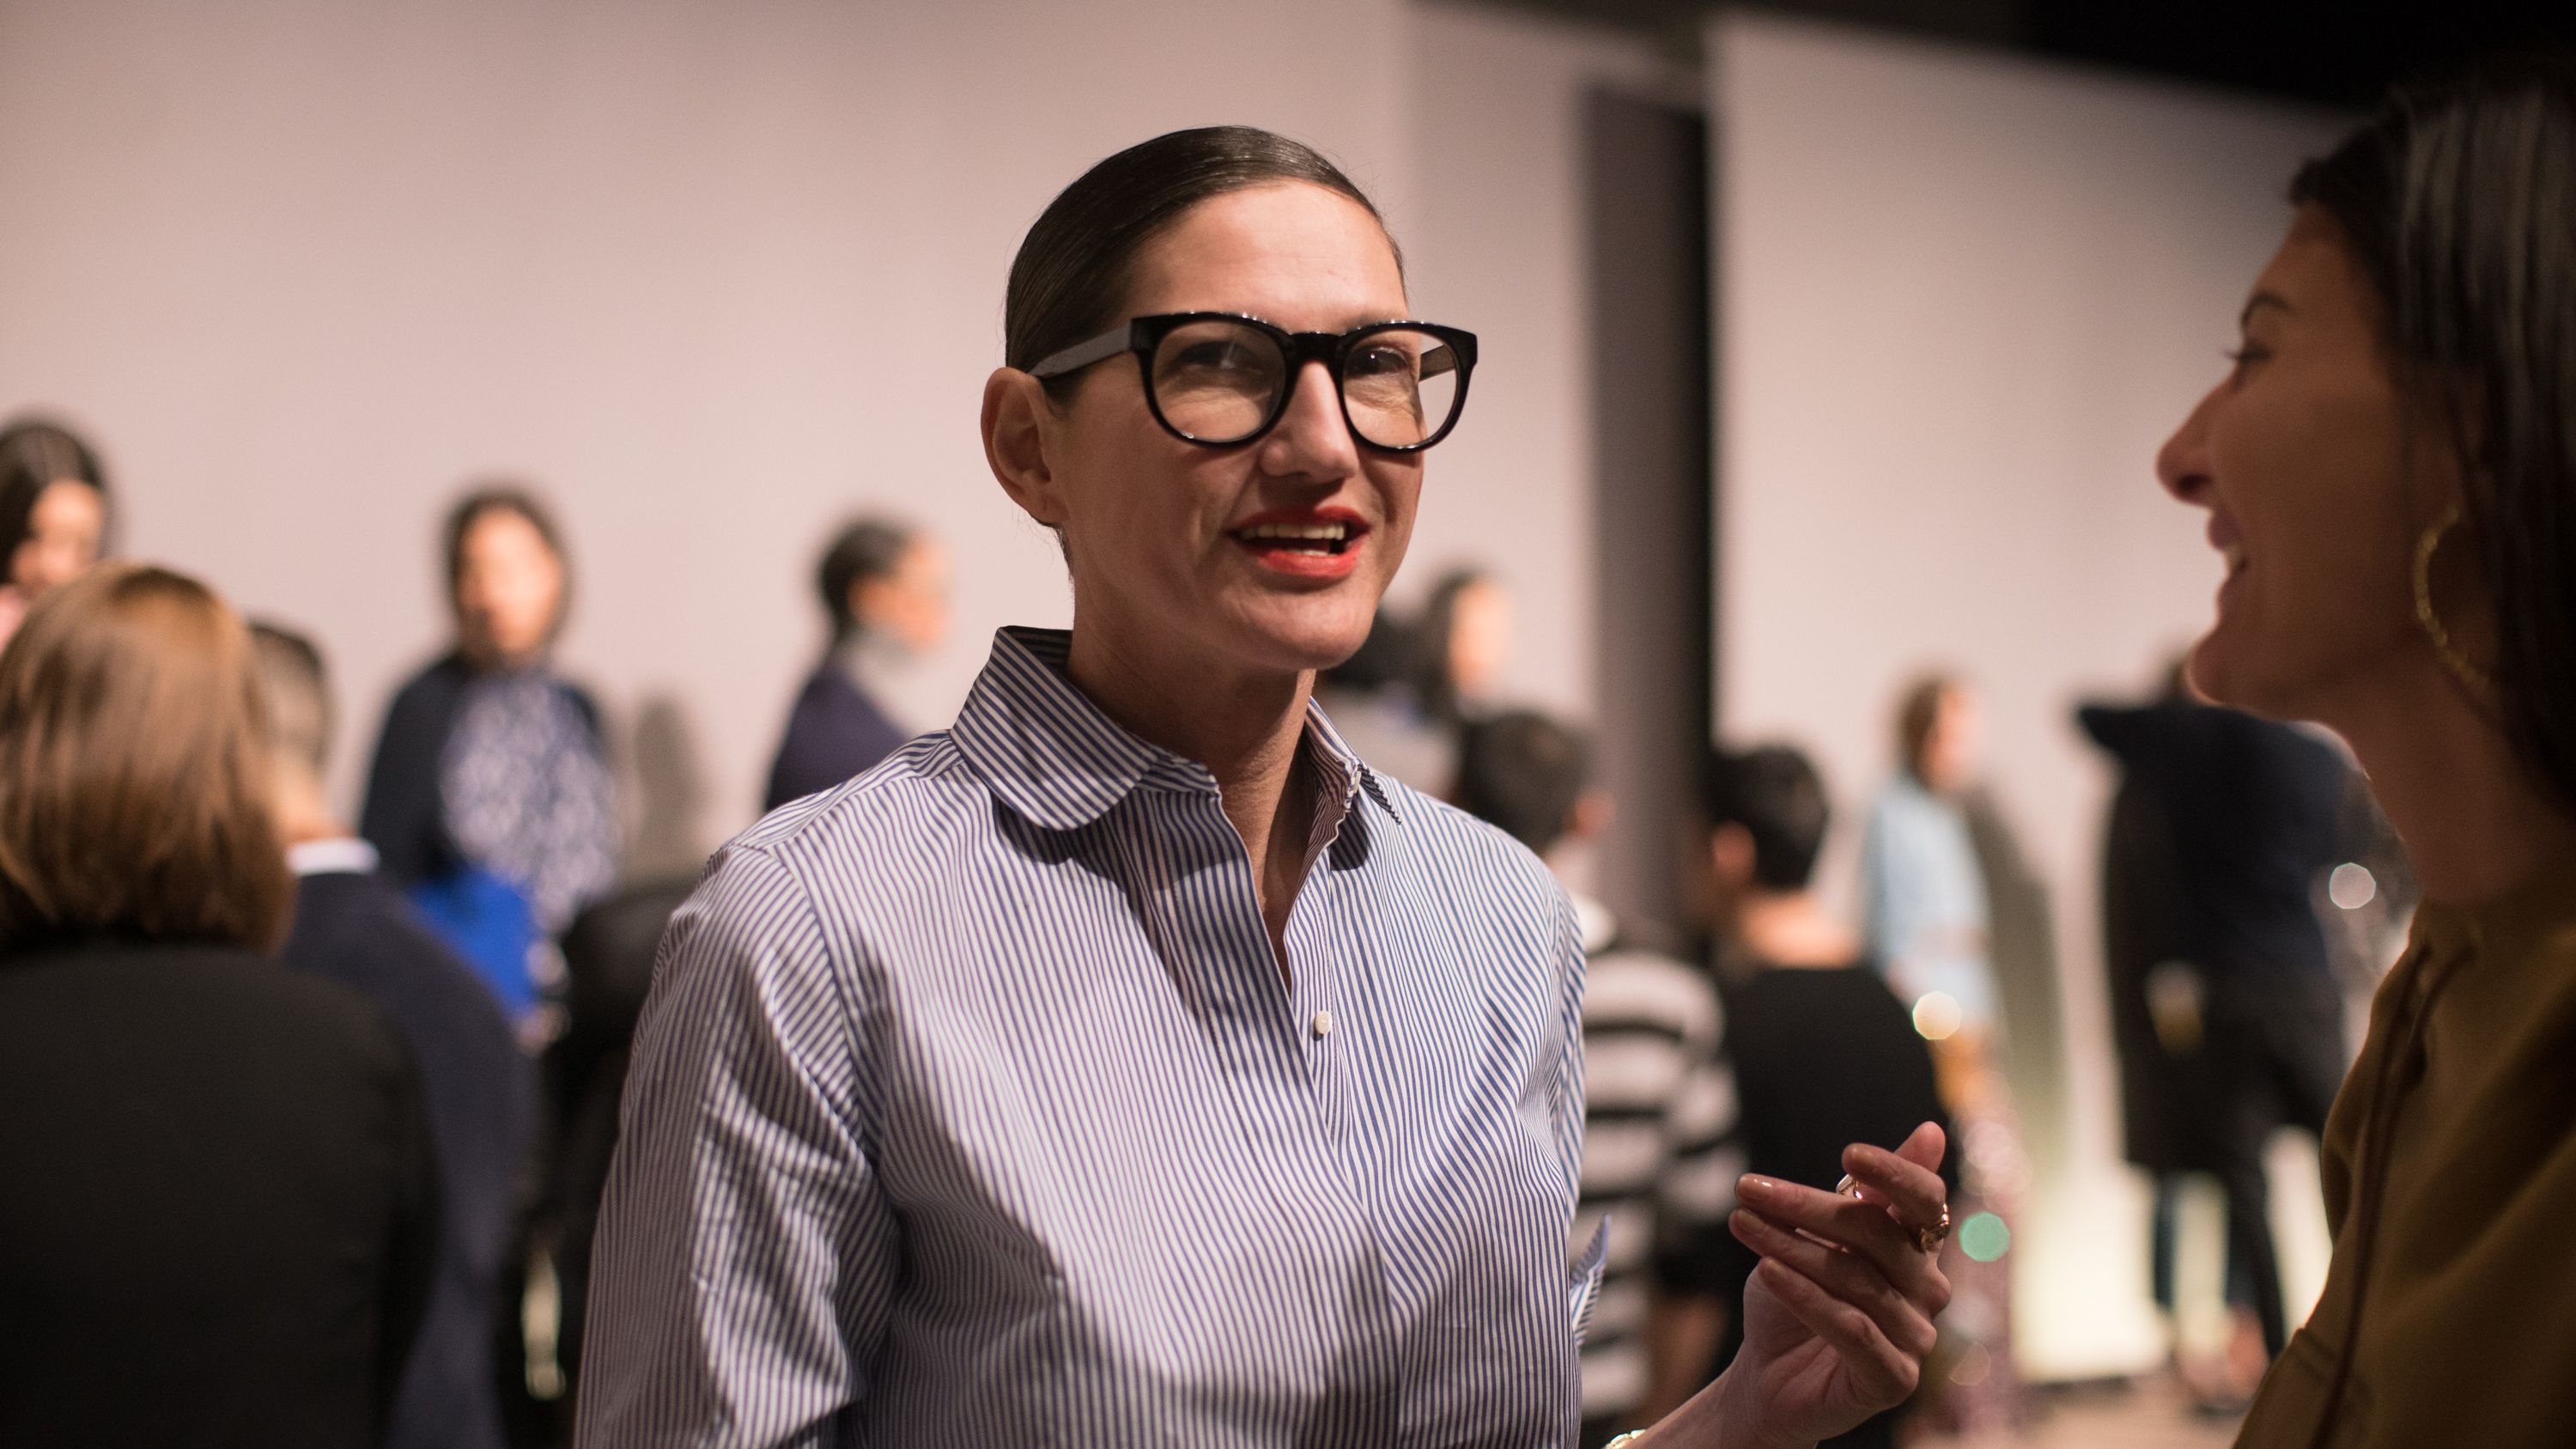 Former J.Crew Executive Jenna Lyons Speaks to AD About Her New HBO Max Show